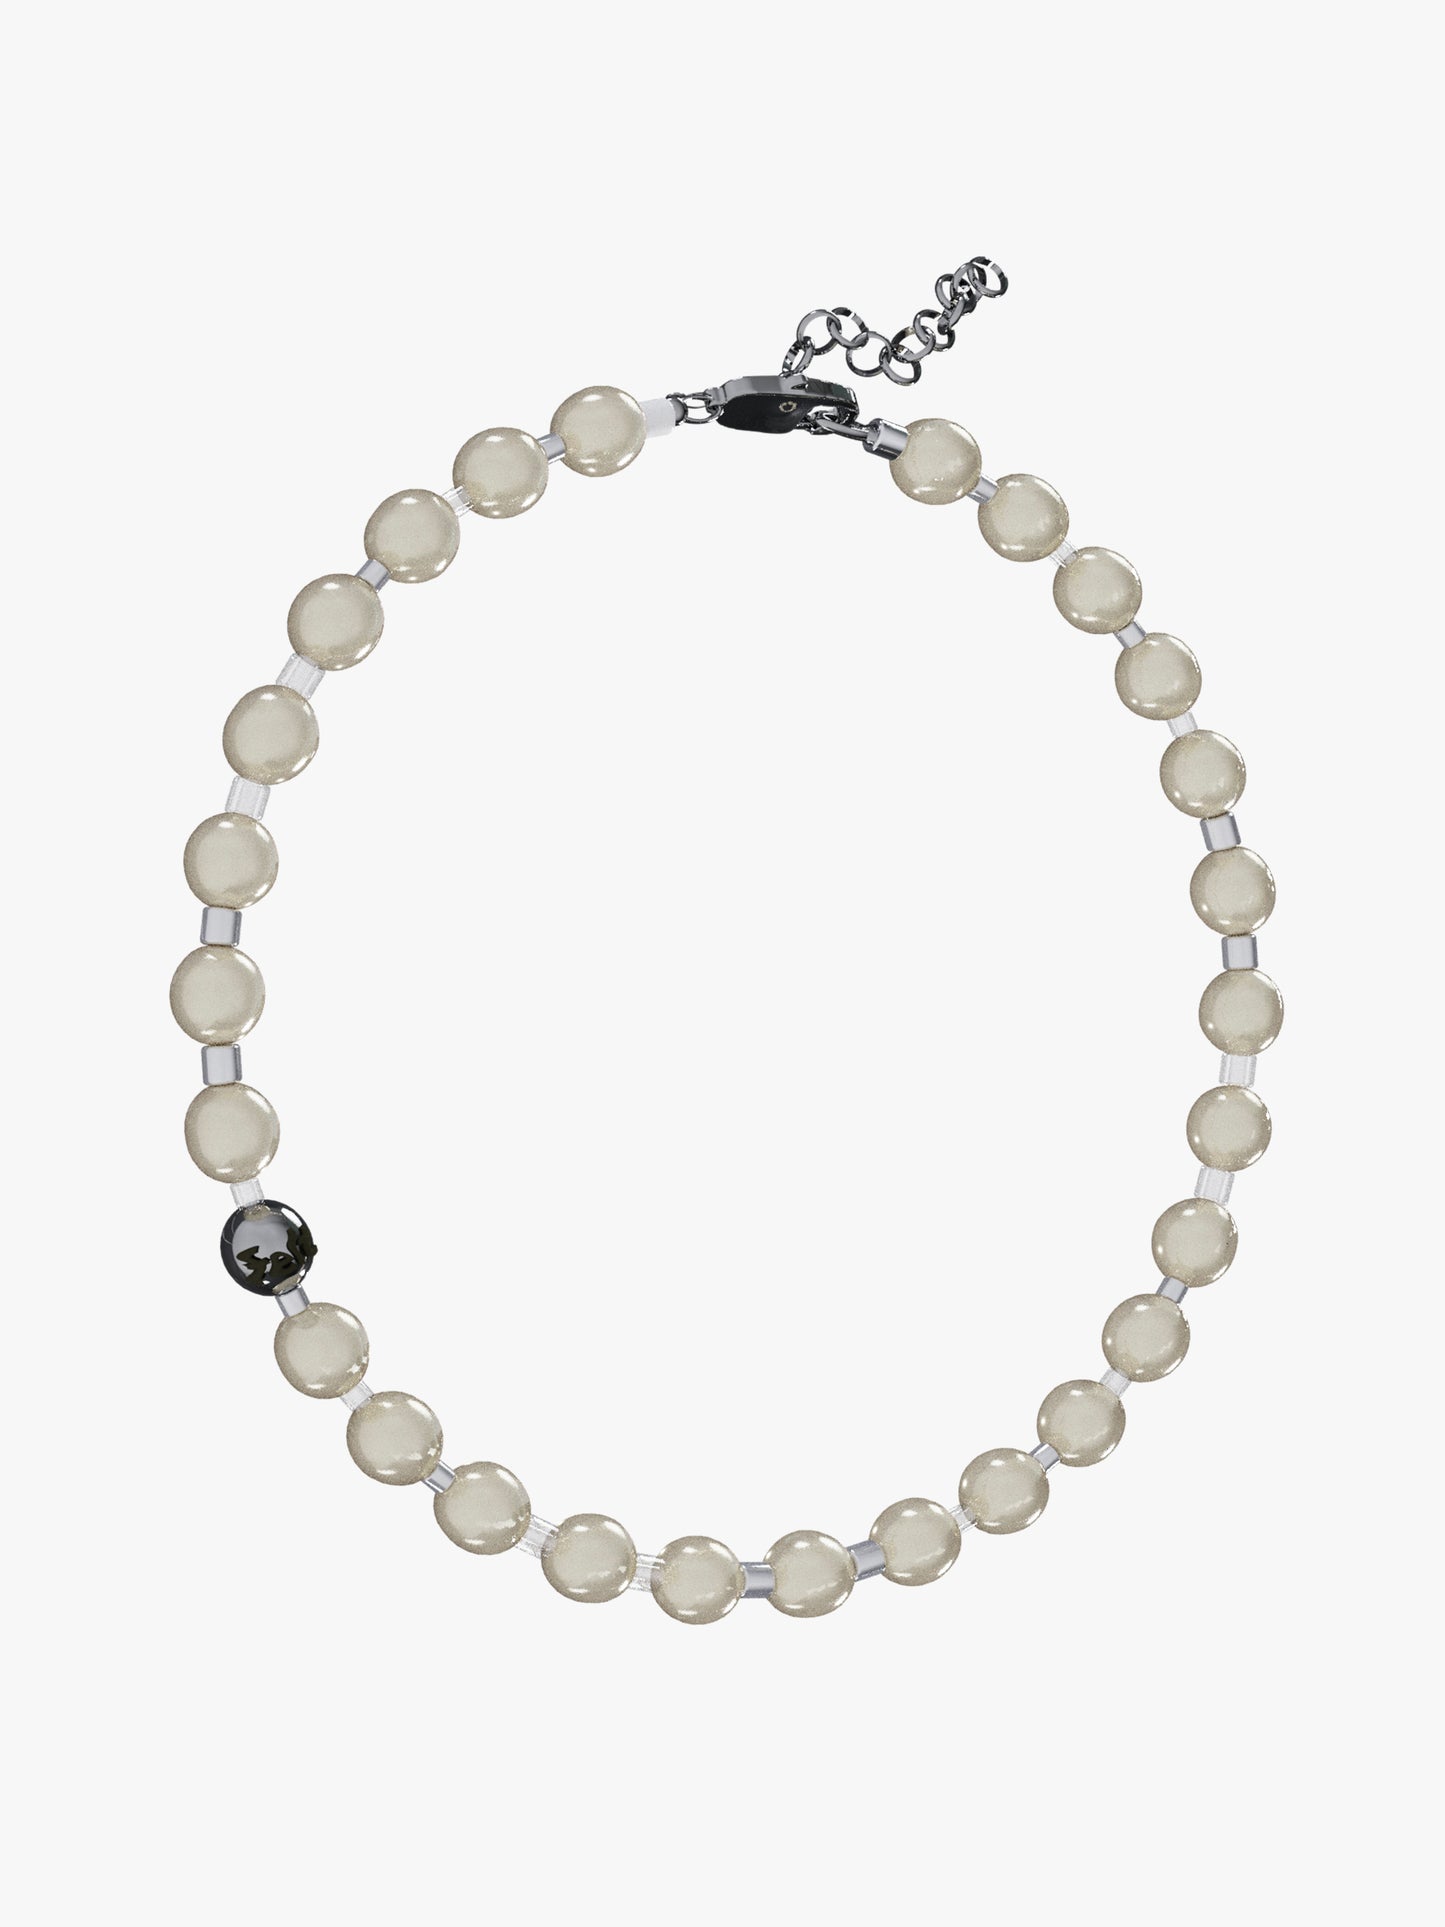 Thick pearl white silver necklace